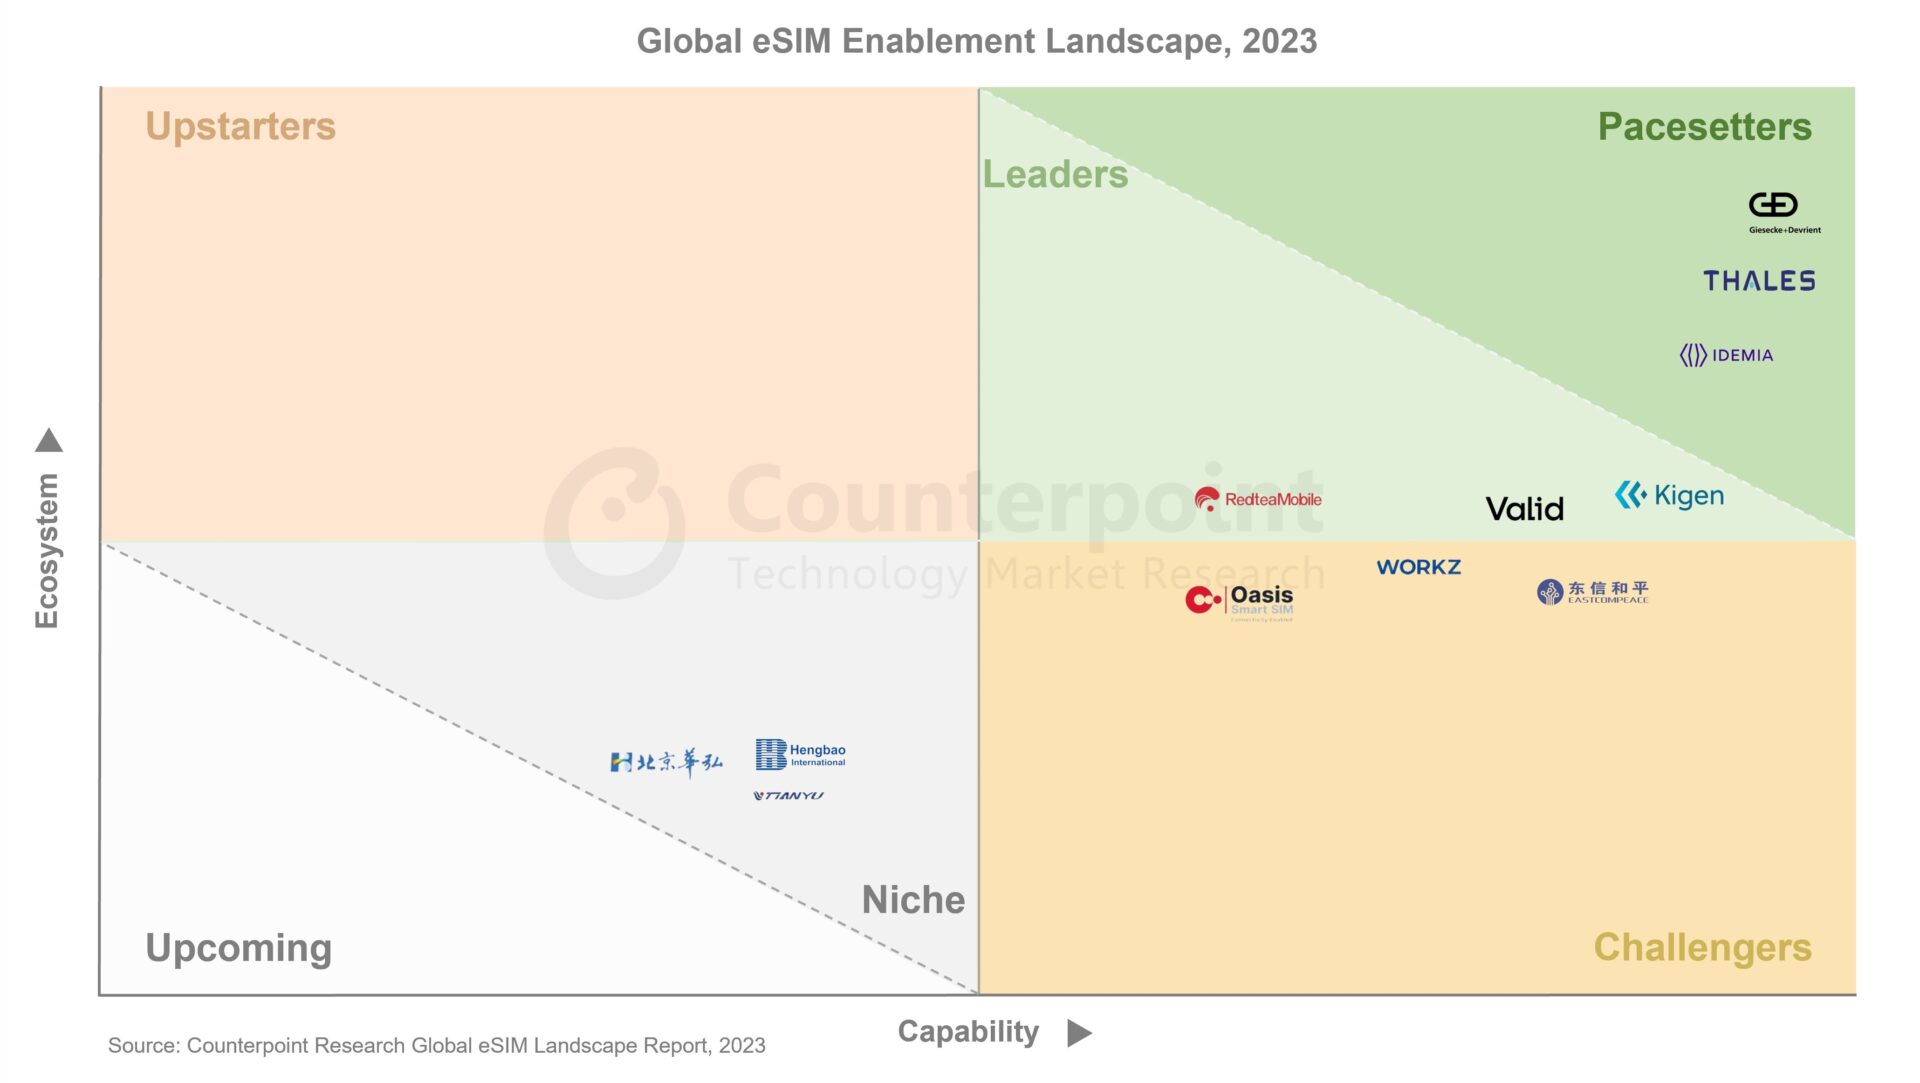 A chart showing the Global eSIM Enablement Landscape in 2023